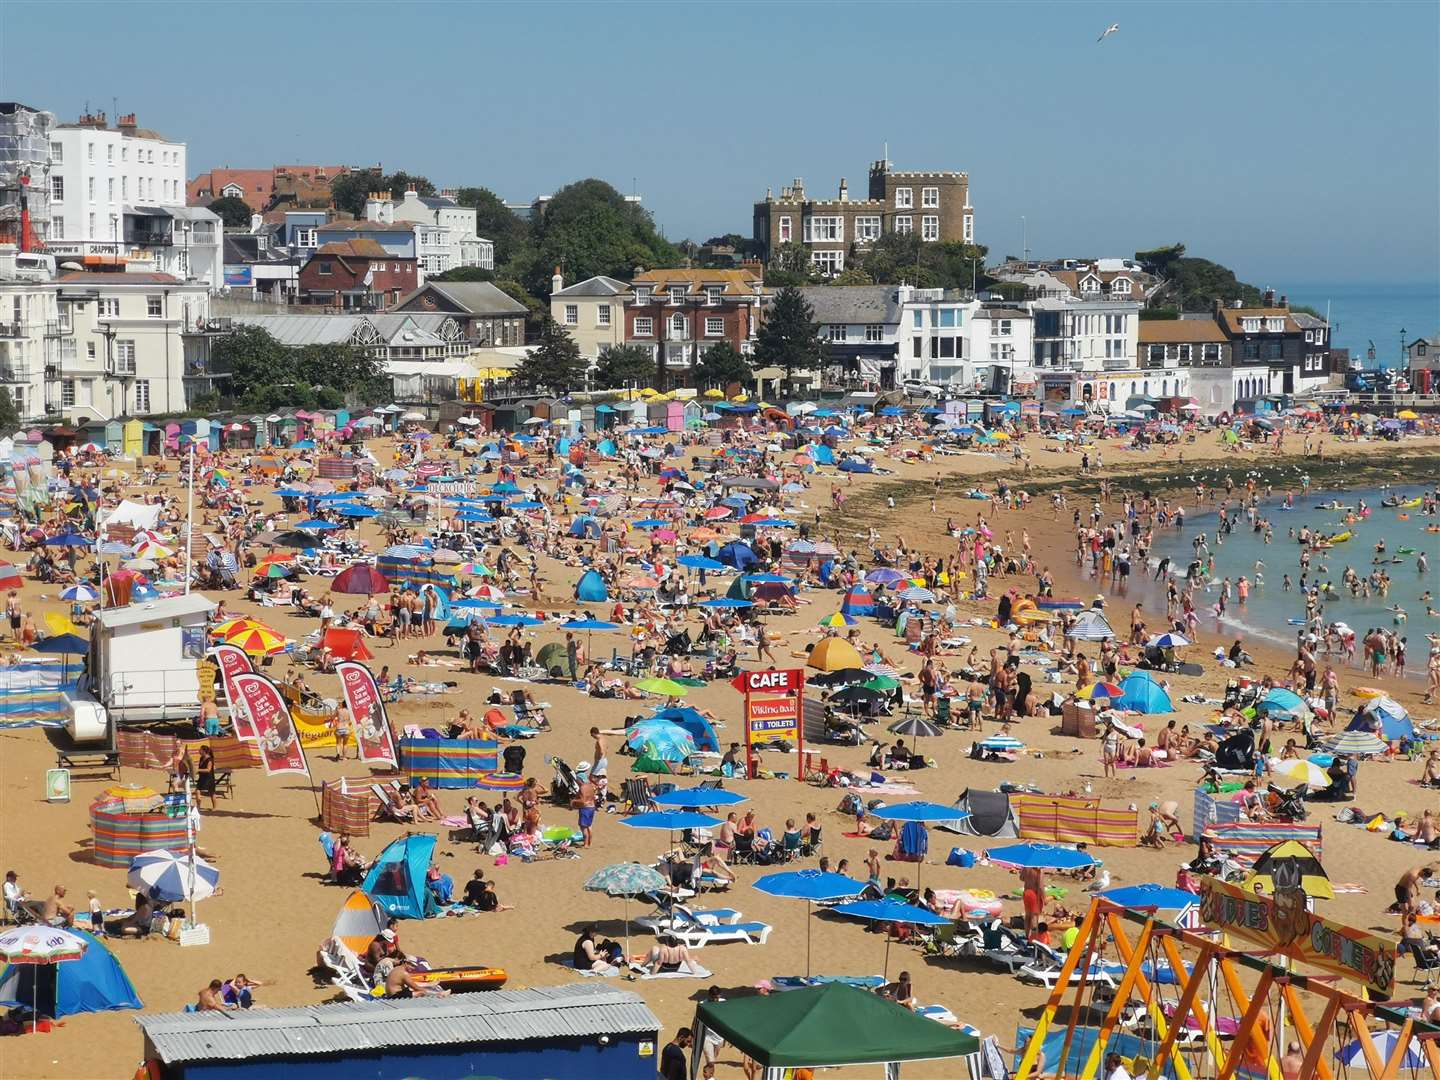 A spell of hot weather in July led to large gatherings - and concerns over social distancing - on many Kent beaches. This picture was taken in Margate.